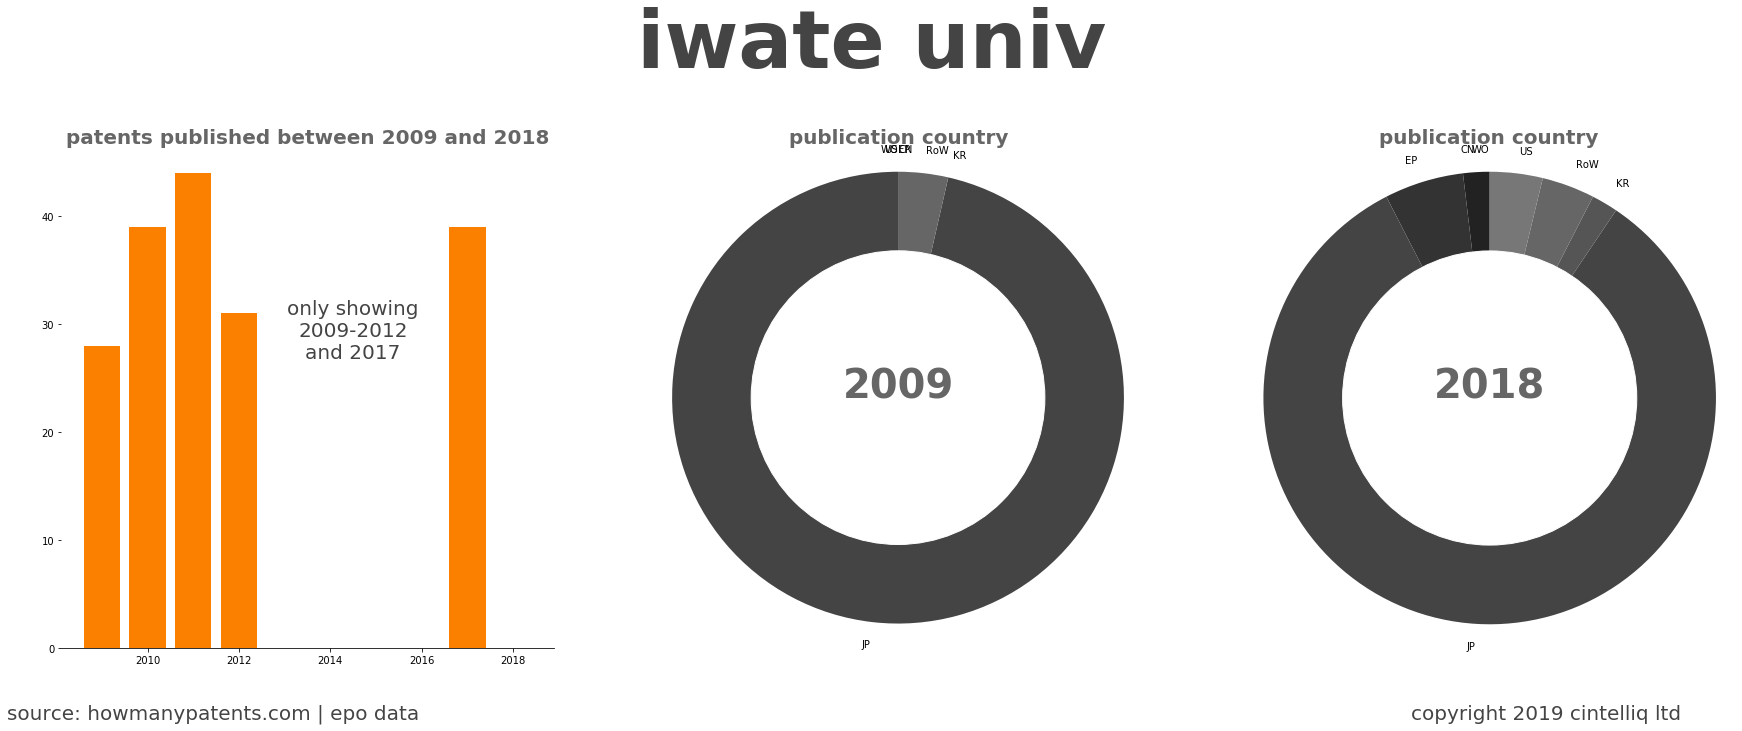 summary of patents for Iwate Univ